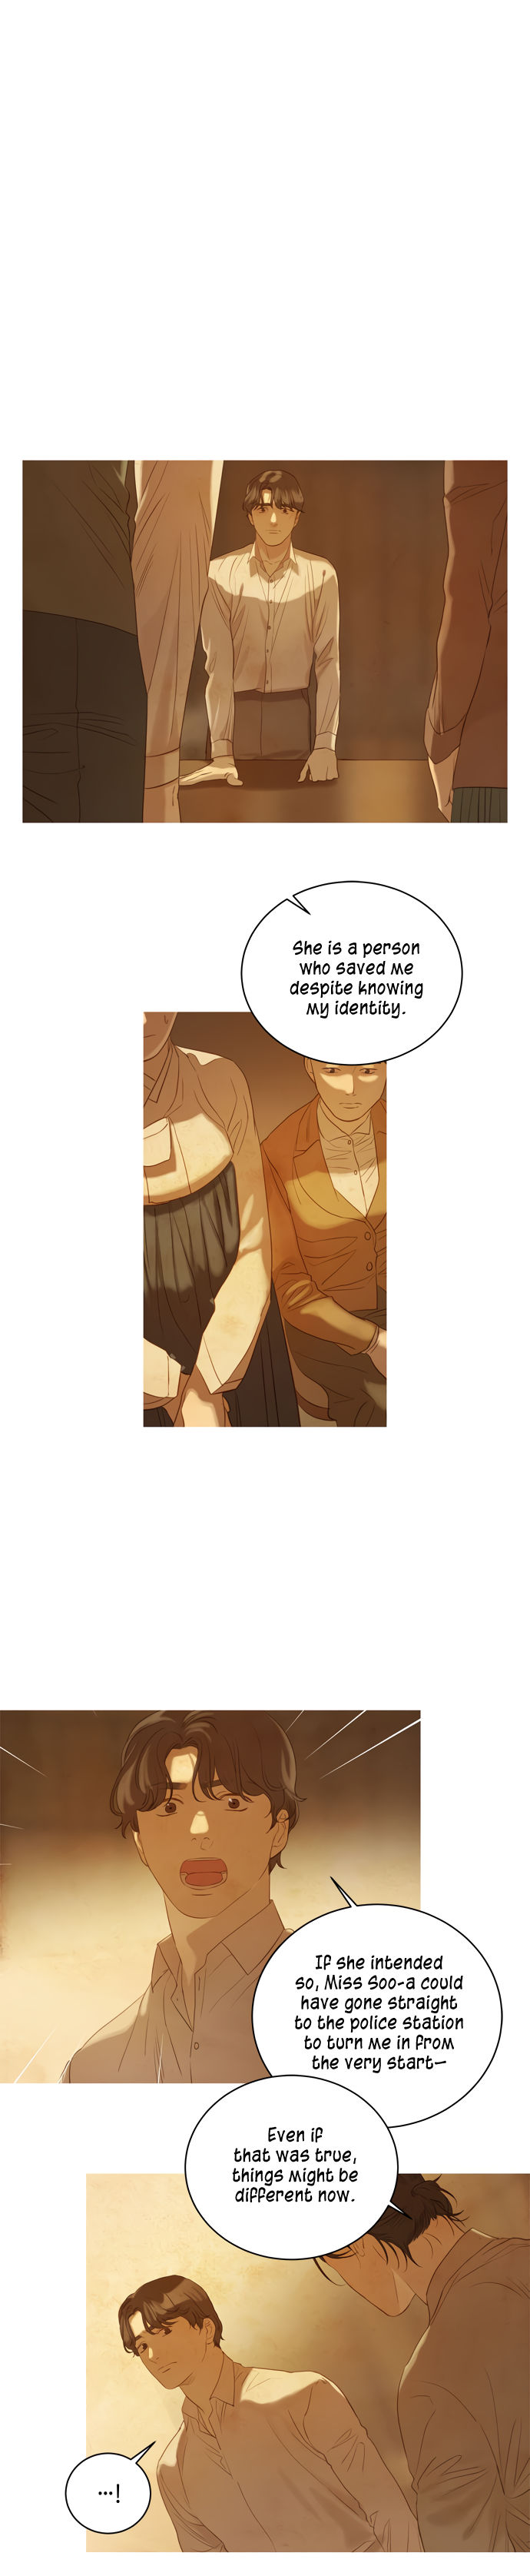 Gorae Byul - The Gyeongseong Mermaid - Chapter 19 Page 15